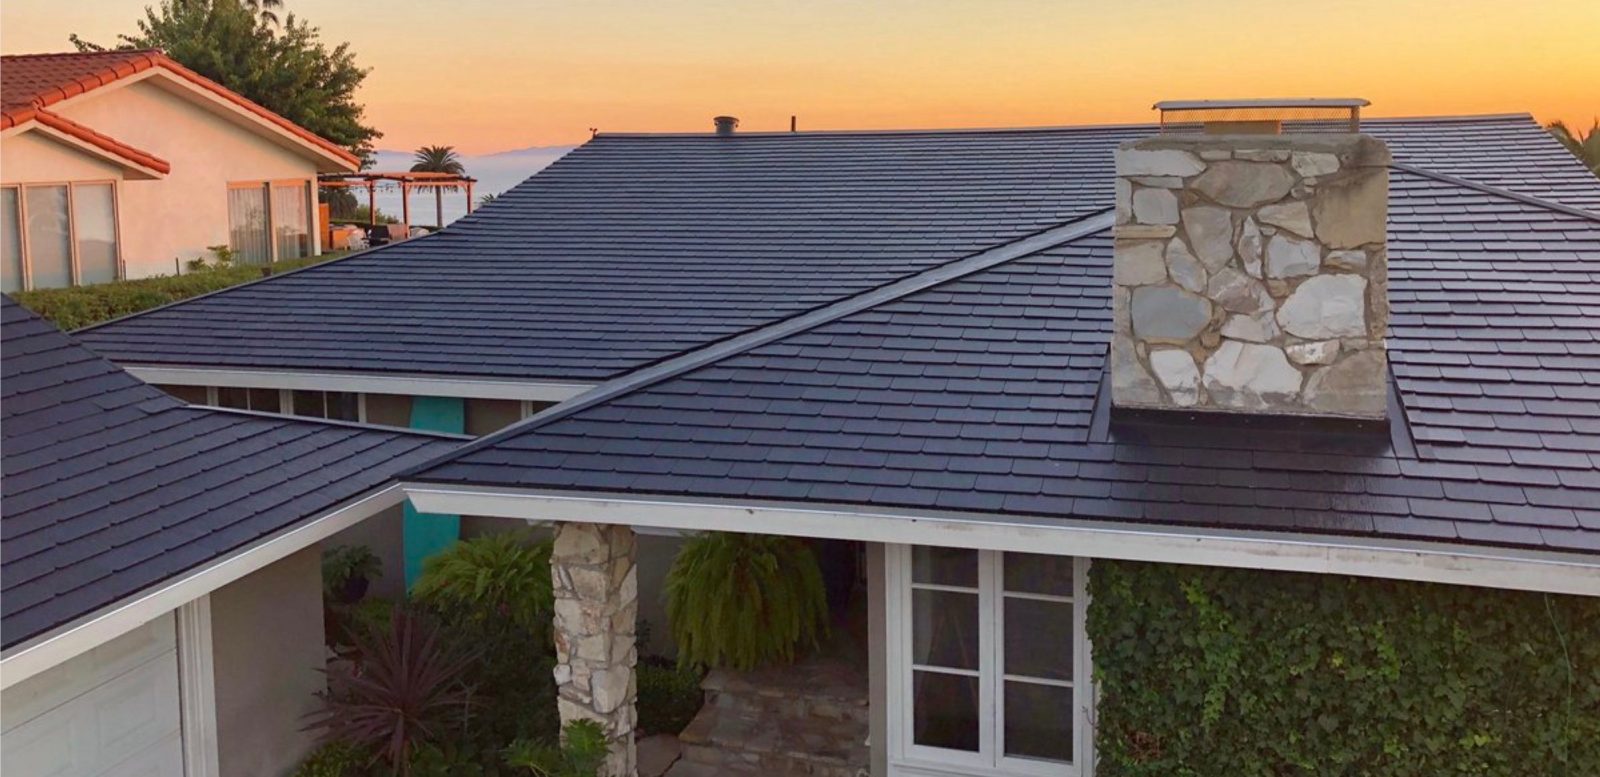 Tesla Solar Roof volume production is delayed to next year